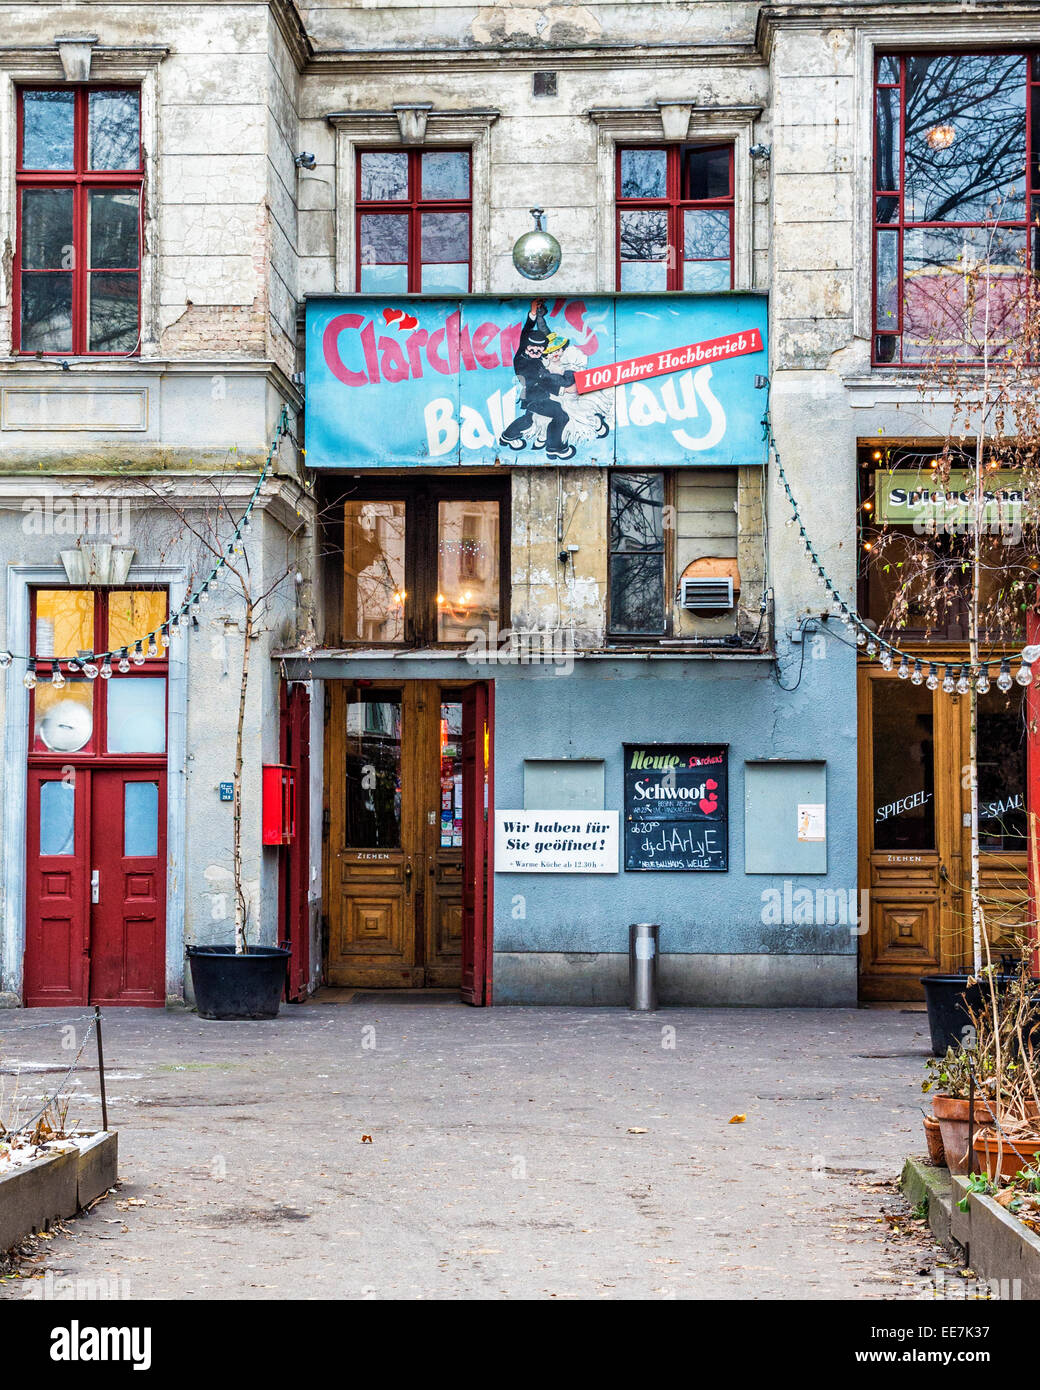 Berlin Ballhaus High Resolution Stock Photography and Images - Alamy